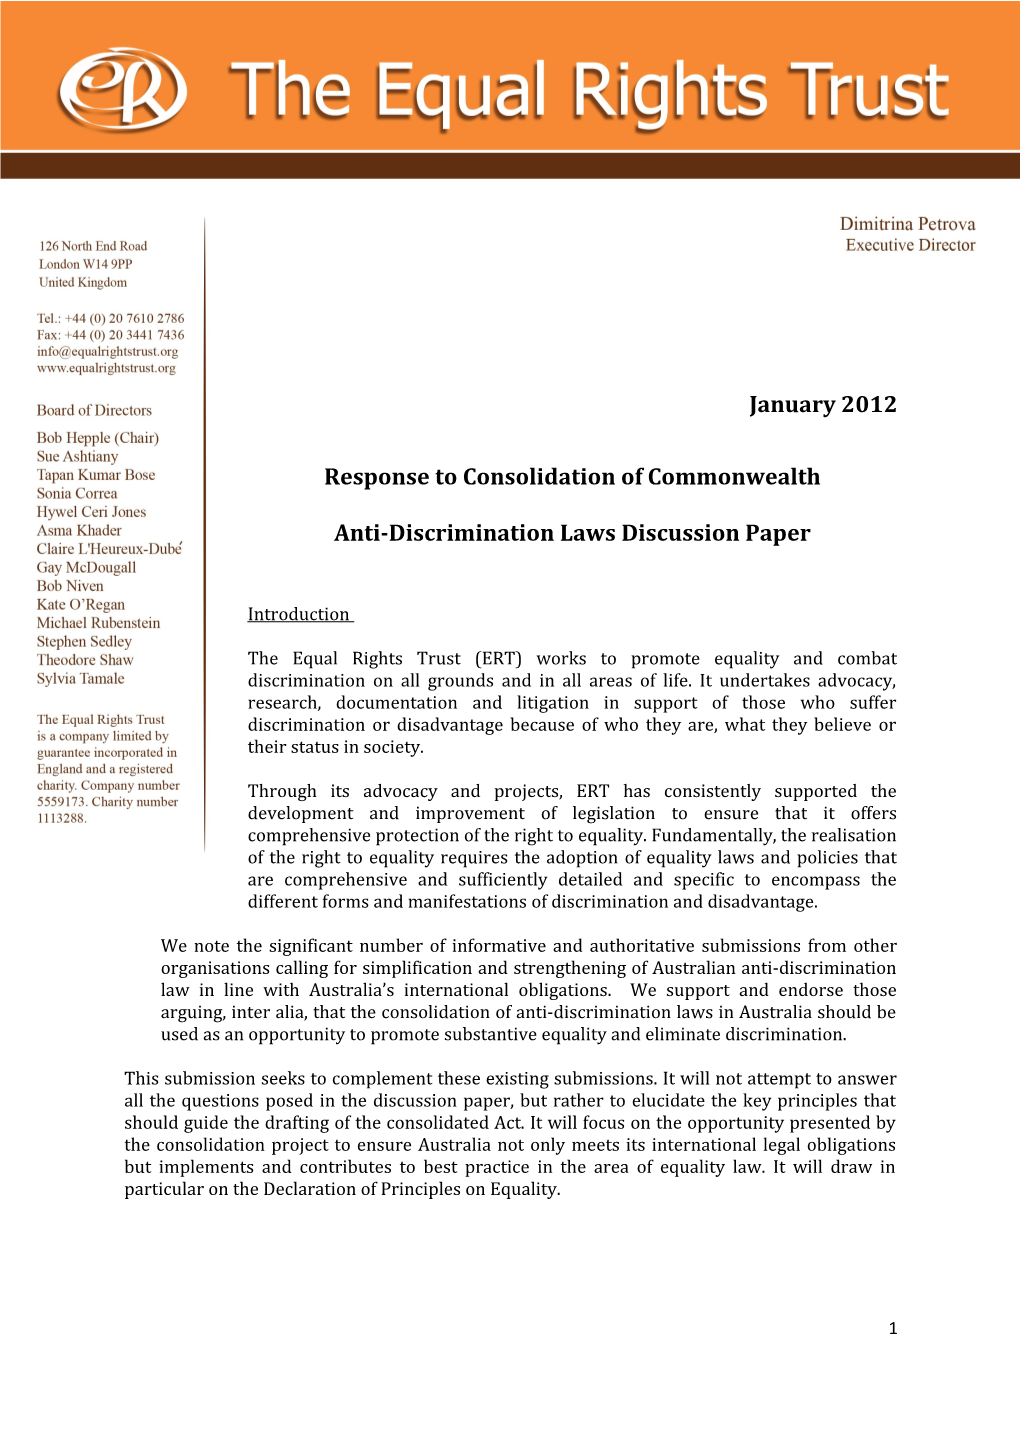 Submission on the Consolidation of Commonwealth Anti-Discrimination Laws - the Equal Rights